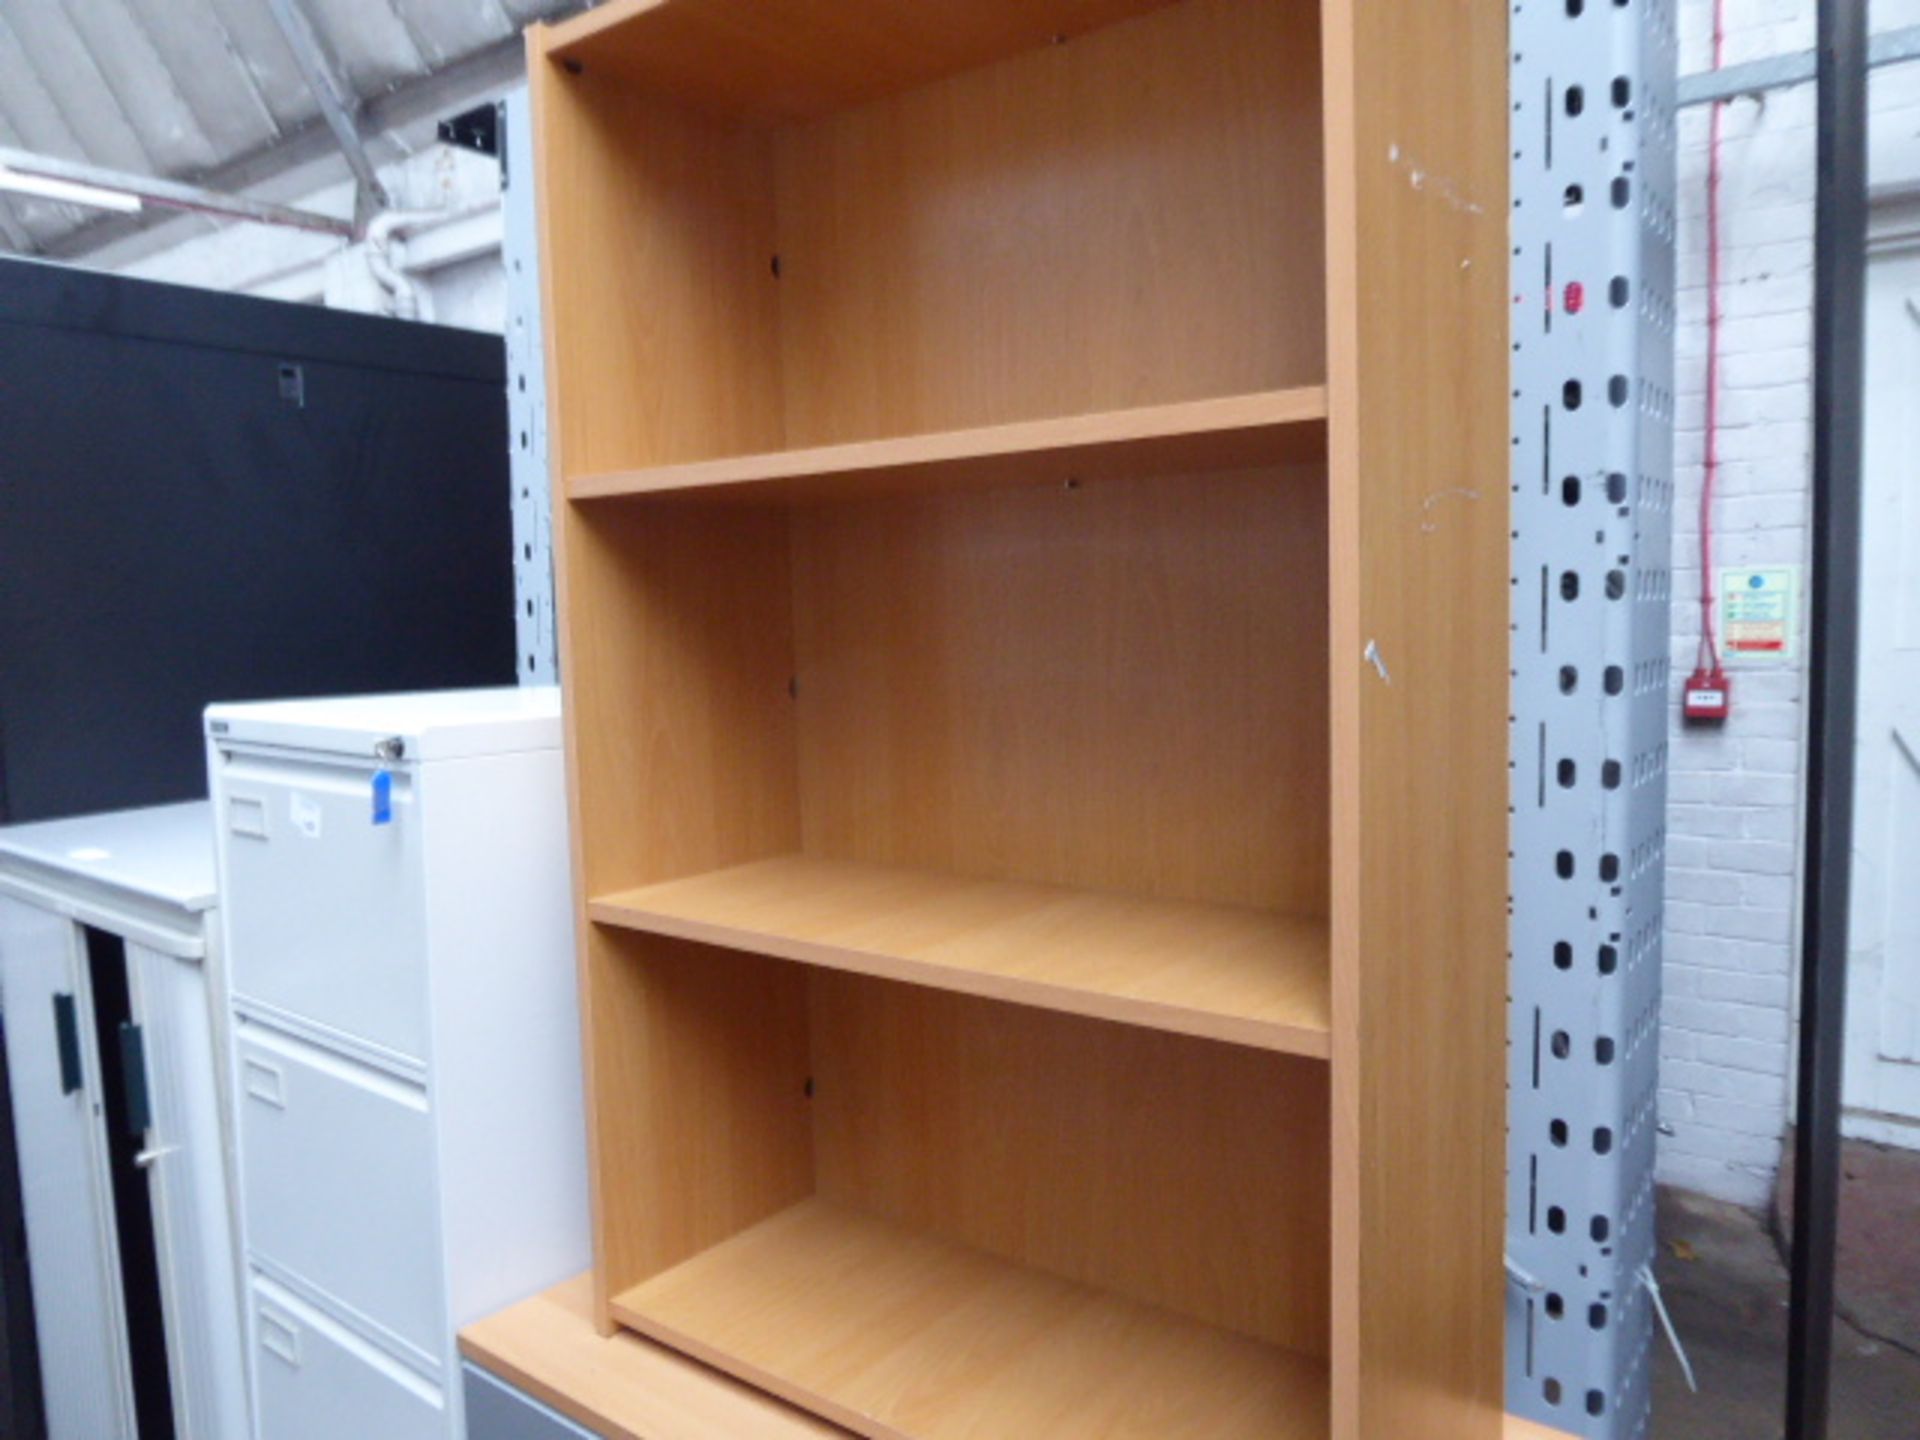 100 cm low level 2 door stationery cabinet with an open front bookcase - Image 2 of 2